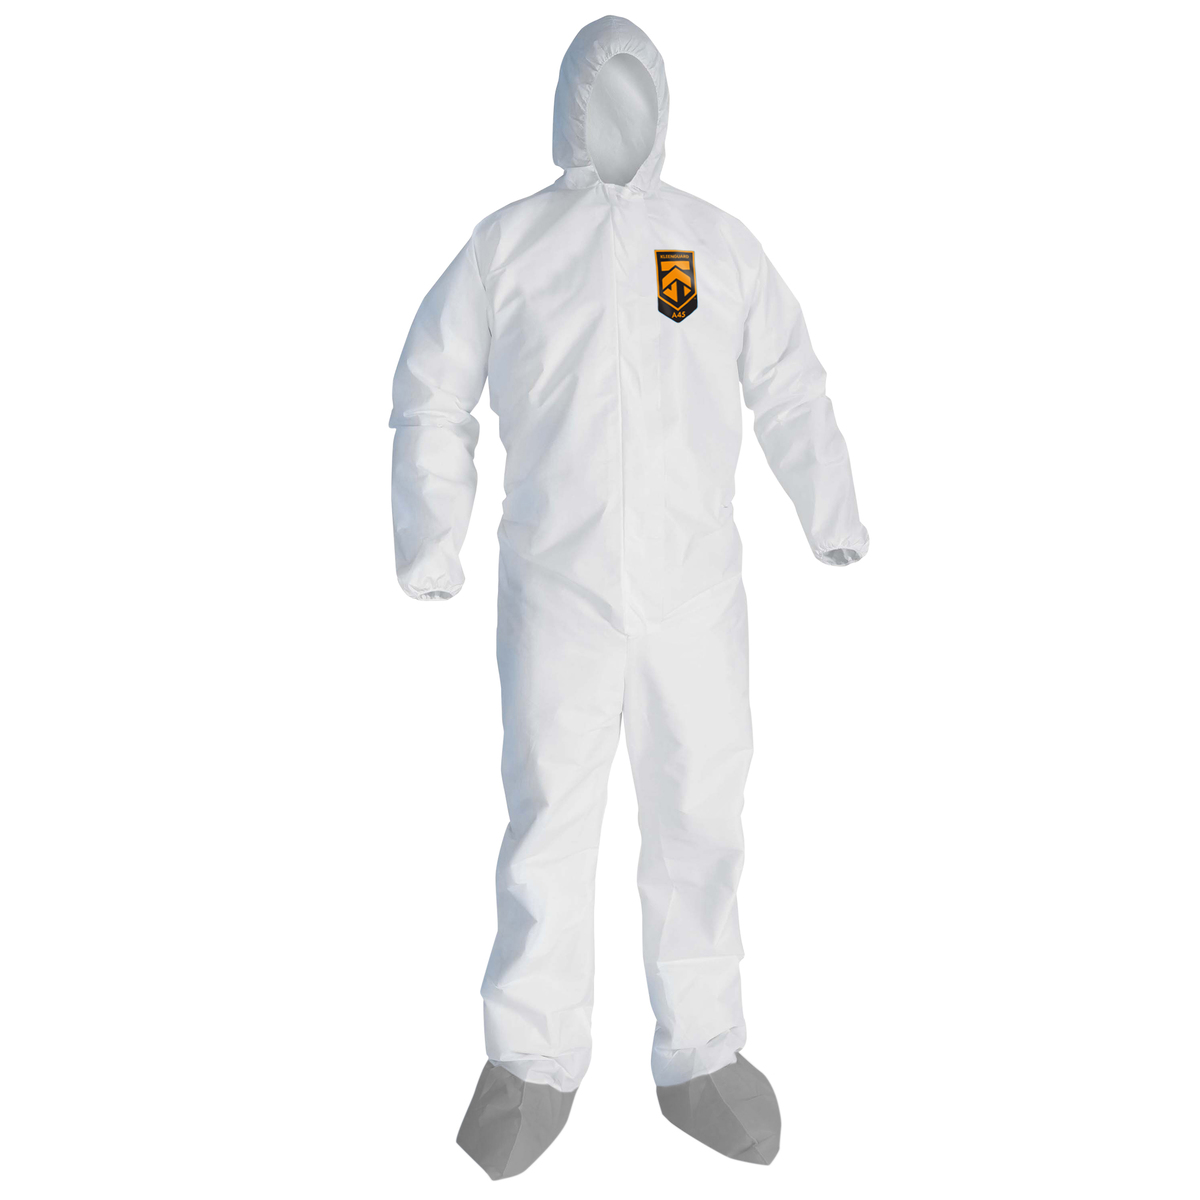 Kimberly-Clark Professional™ 2XL White KleenGuard™ A45 Disposable Coveralls (Availability restrictions apply.)